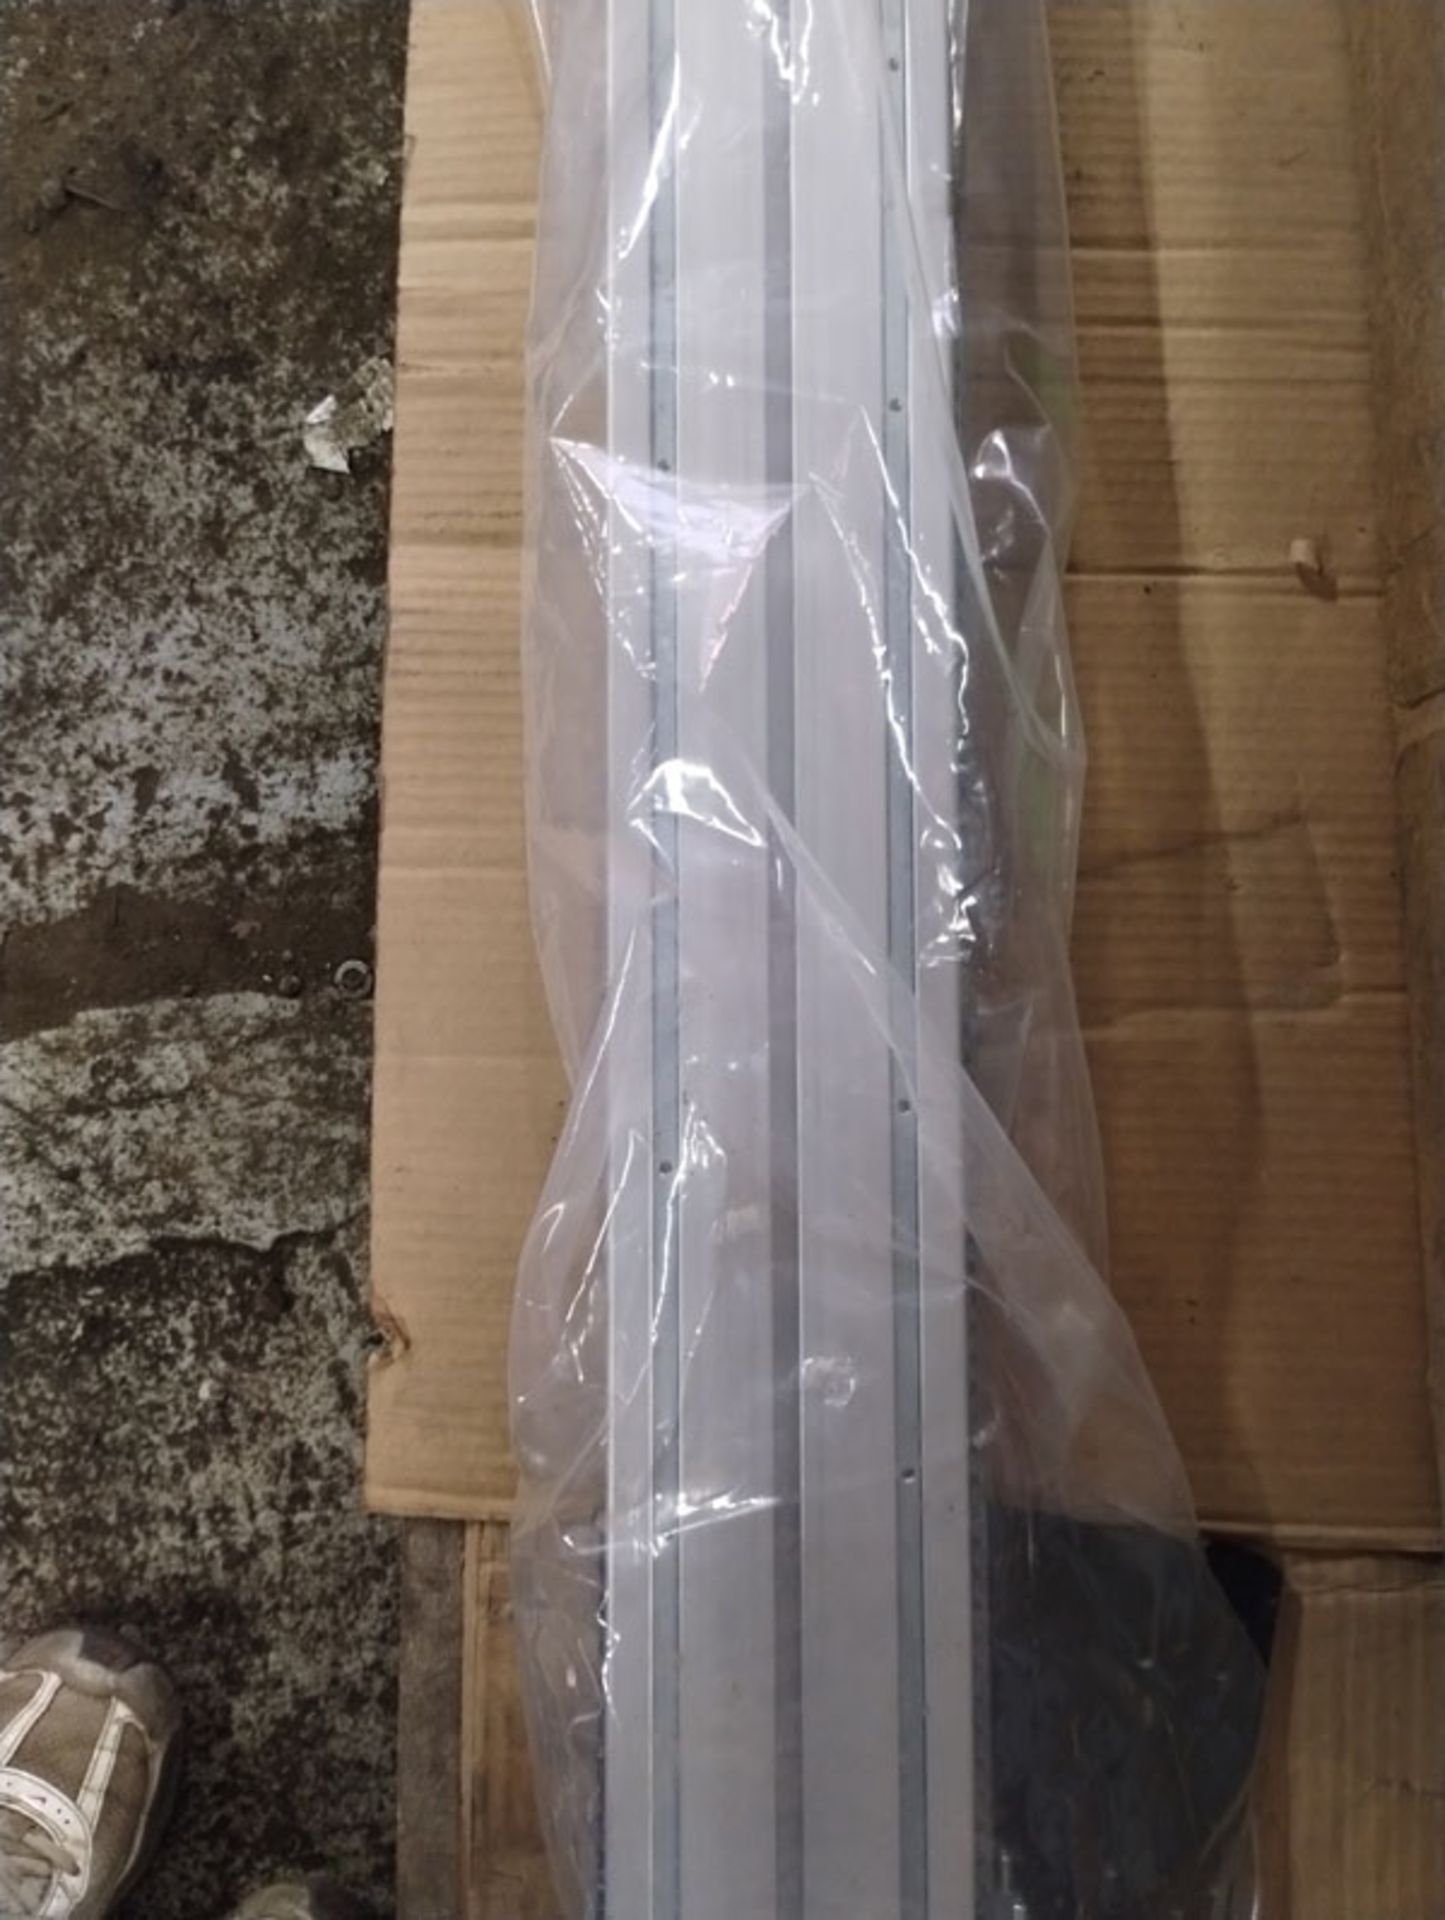 62" LINEAR ACTUATOR PART# 8676A01 -- Lot located at second location: 6800 Union ave. , Cleveland OH - Image 7 of 11